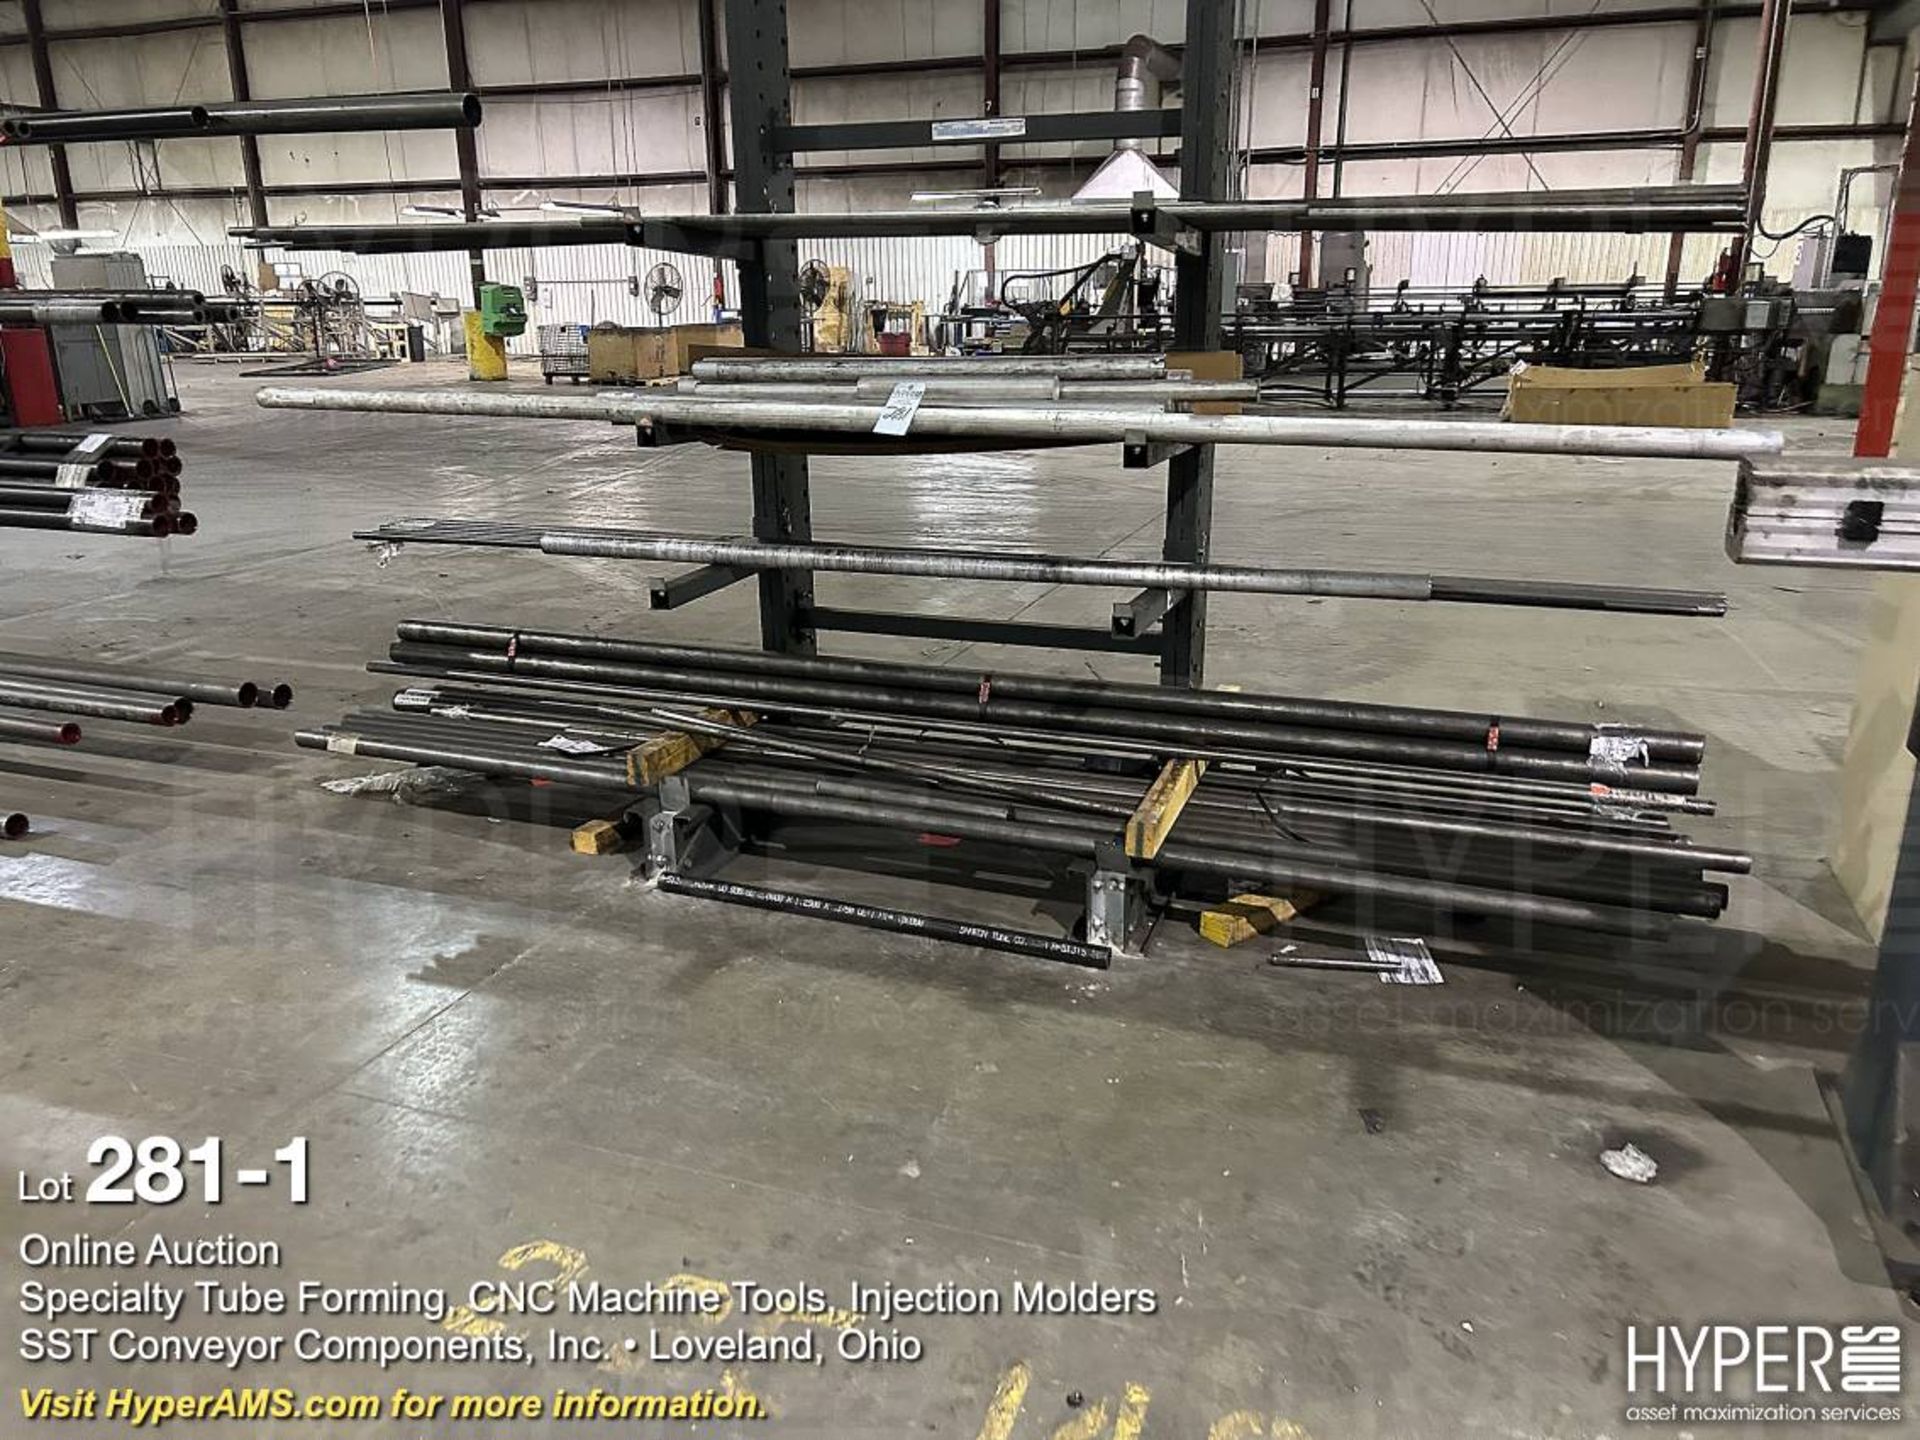 Steel bar stock and tubing stock on cantilever racking